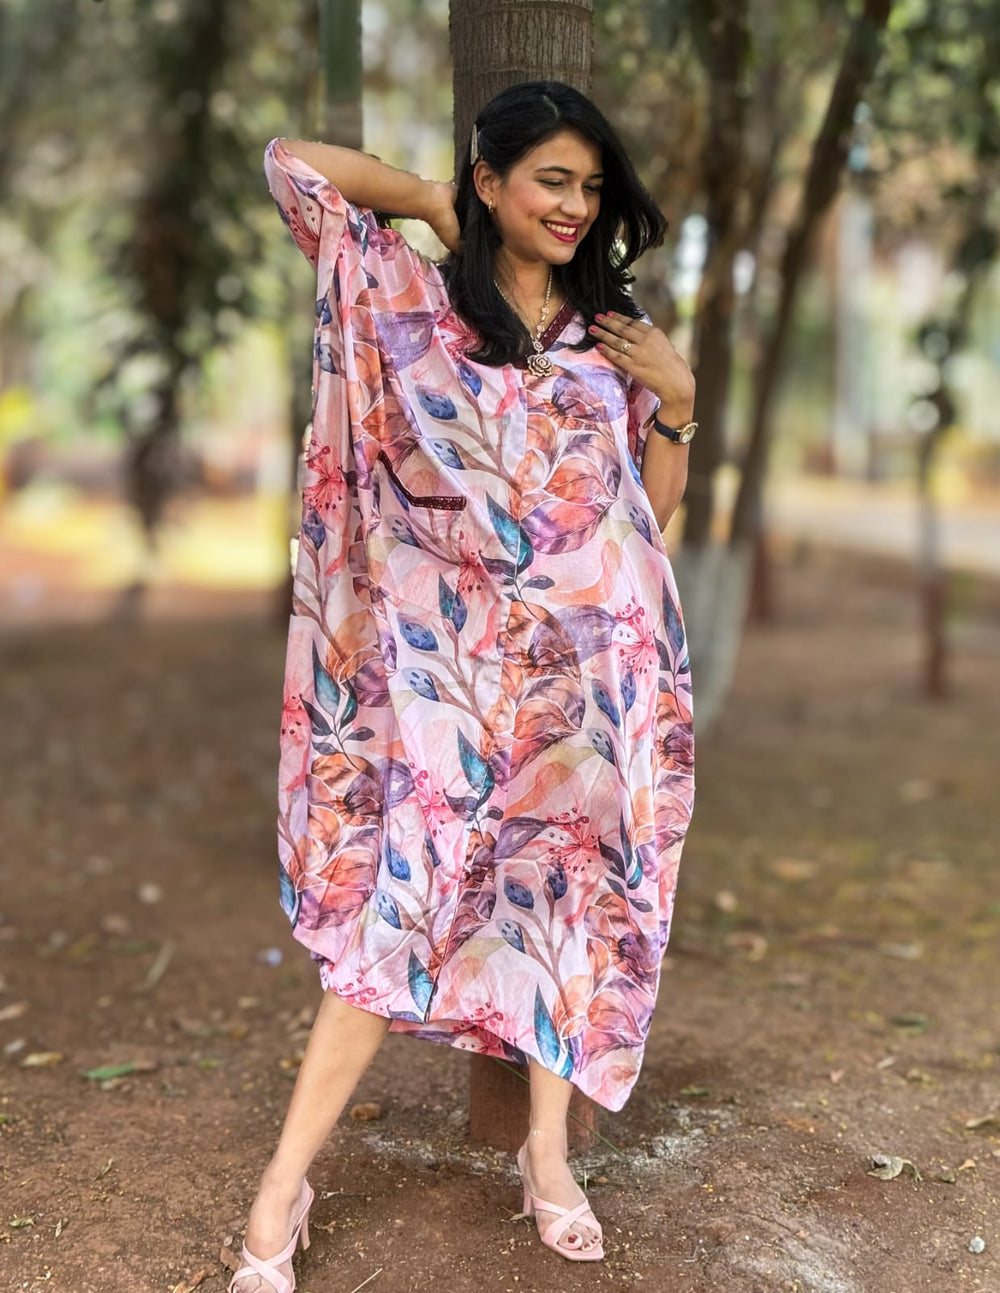 Pink Kaftan with vibrant floral print inspired by Coral Cove. Perfect for everyday outings, adding joy and confidence to your wardrobe. #PinkKaftan #CoralCoveInspired #FloralPrint #Fashionista #ConfidenceBoost